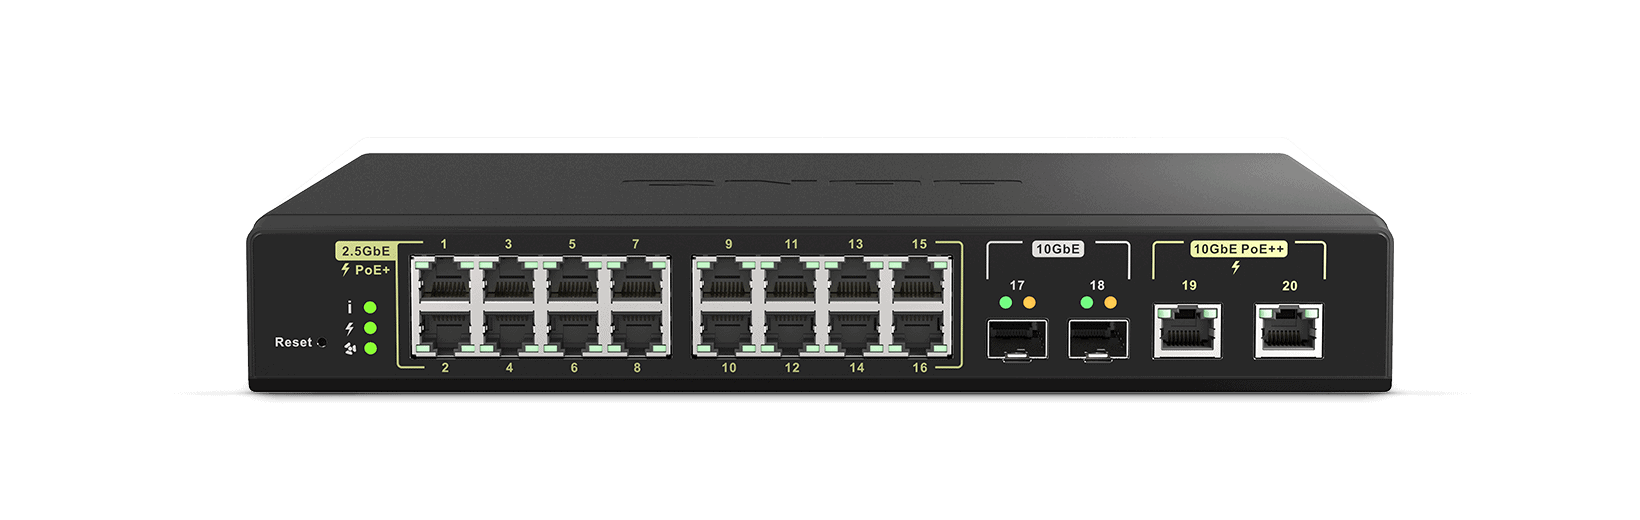 Best 10GB Switch 2020 [Affordable Home Networking] 